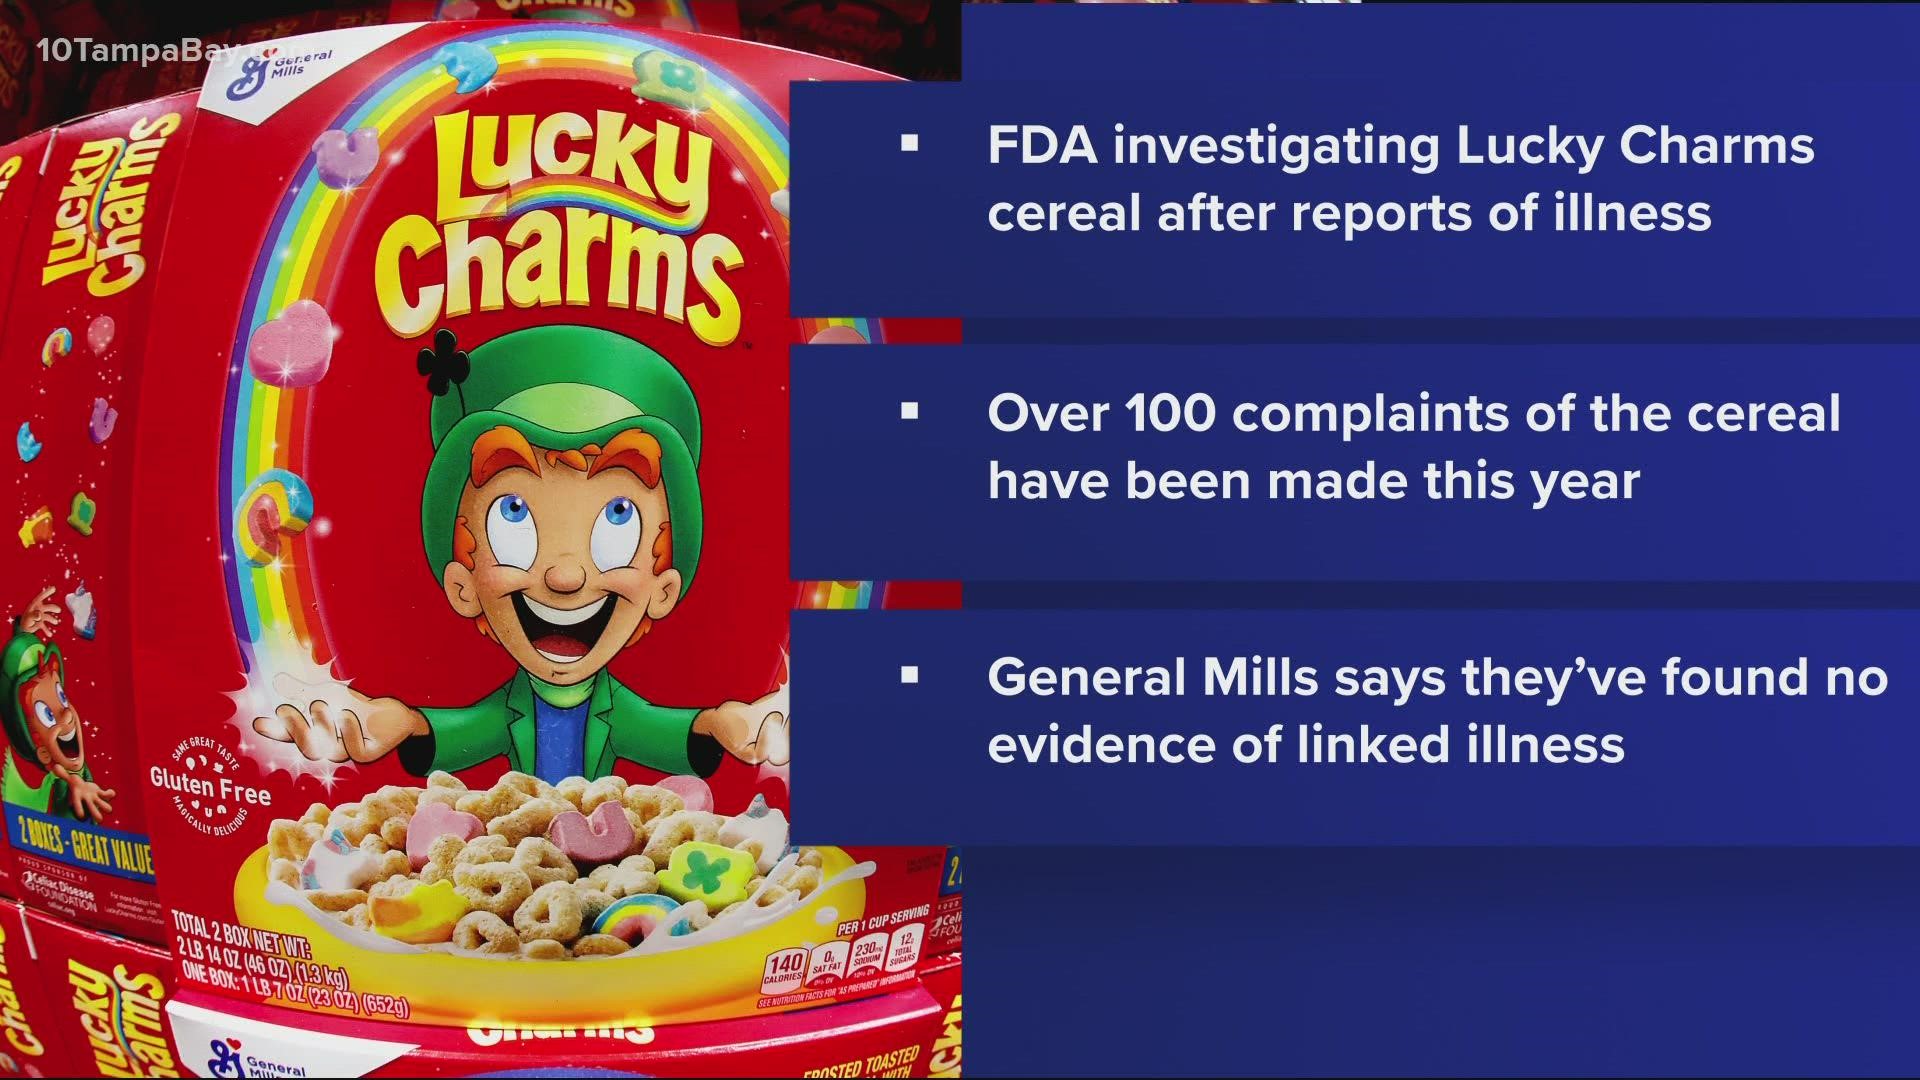 The U.S. Food and Drug Administration is investigating Lucky Charms cereal after dozens of consumers complained of illness after eating it.